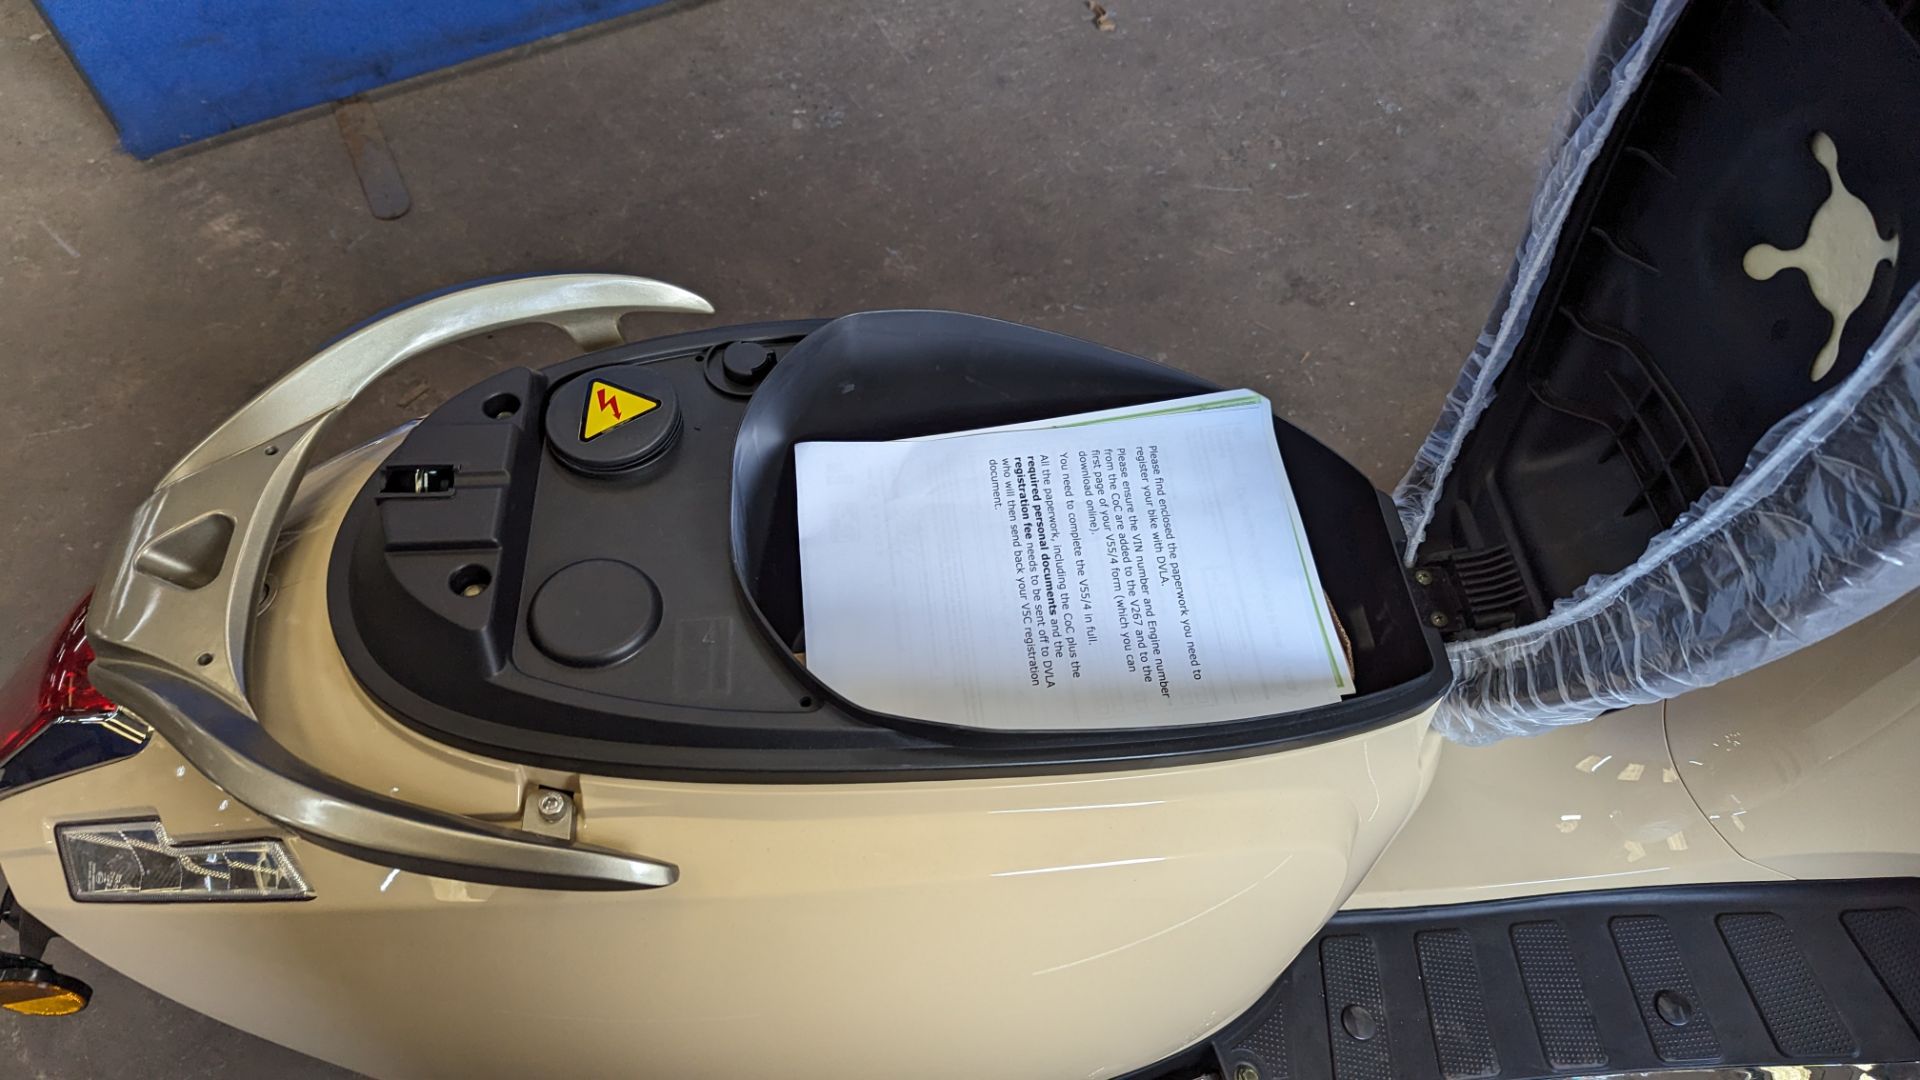 Model 30 Roma electric moped: 2000w brushless DC hub motor, CATL 48V 50Ah removable lithium battery - Image 15 of 22